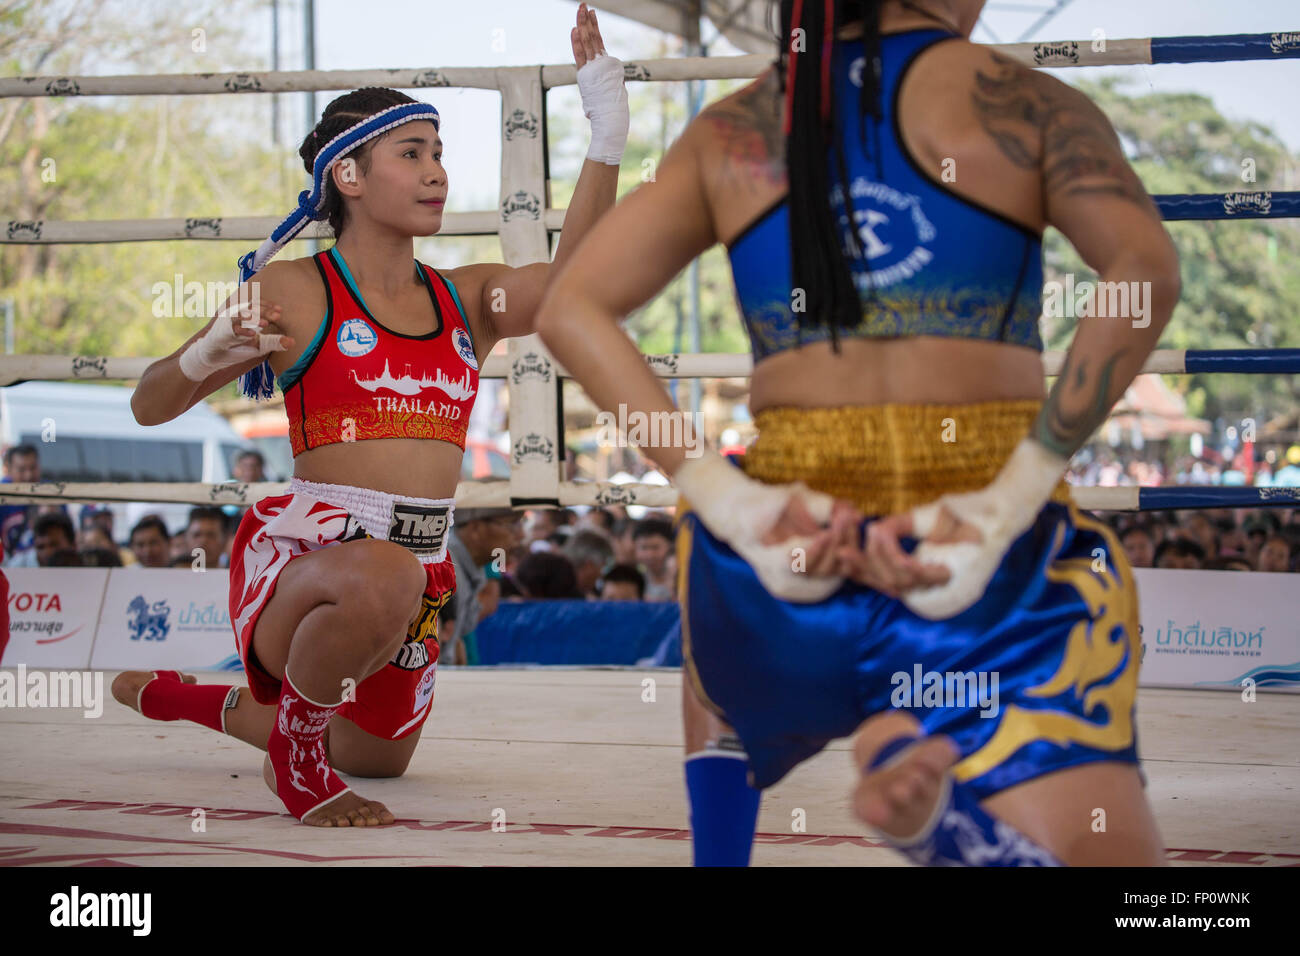 Ayutthaya, Ayutthaya, Thailand. 17th Mar, 2016. This picture shows women performing a ritual dance before the fight during the 12th World Wai Kru Muay Thai Ceremony.The 12th World Wai Kru Muay Thai Ceremony is being held near the famous Wat Maha That Temple in Ayutthaya Historical Park and attract every year more than 1200 Muay Thai fighters from 57 countries to showcase some of the sacred martial art rituals of Muay Thai Boxing. © Guillaume Payen/ZUMA Wire/Alamy Live News Stock Photo